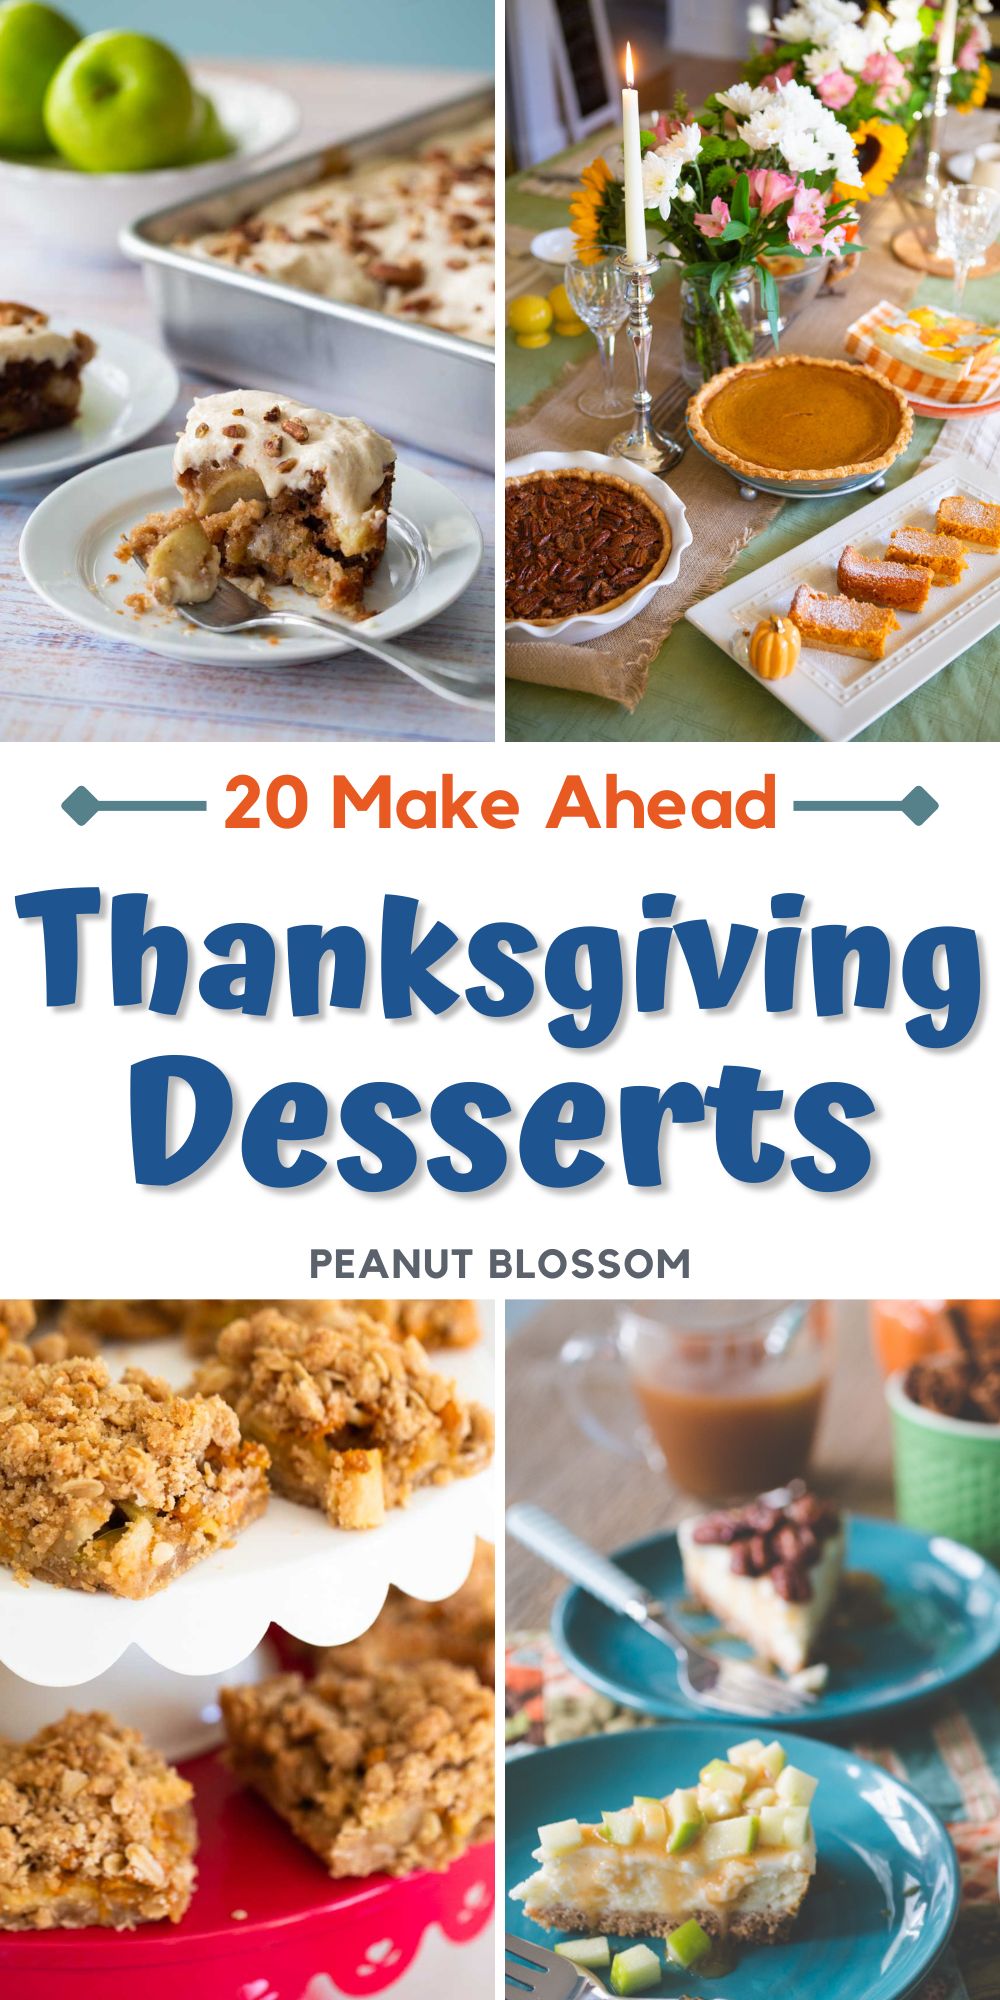 The photo collage shows 4 travel friendly make ahead Thanksgiving desserts including apple cake, pumpkin and pecan pies, apple crisp bars, and a vanilla cheesecake with apple toppings.